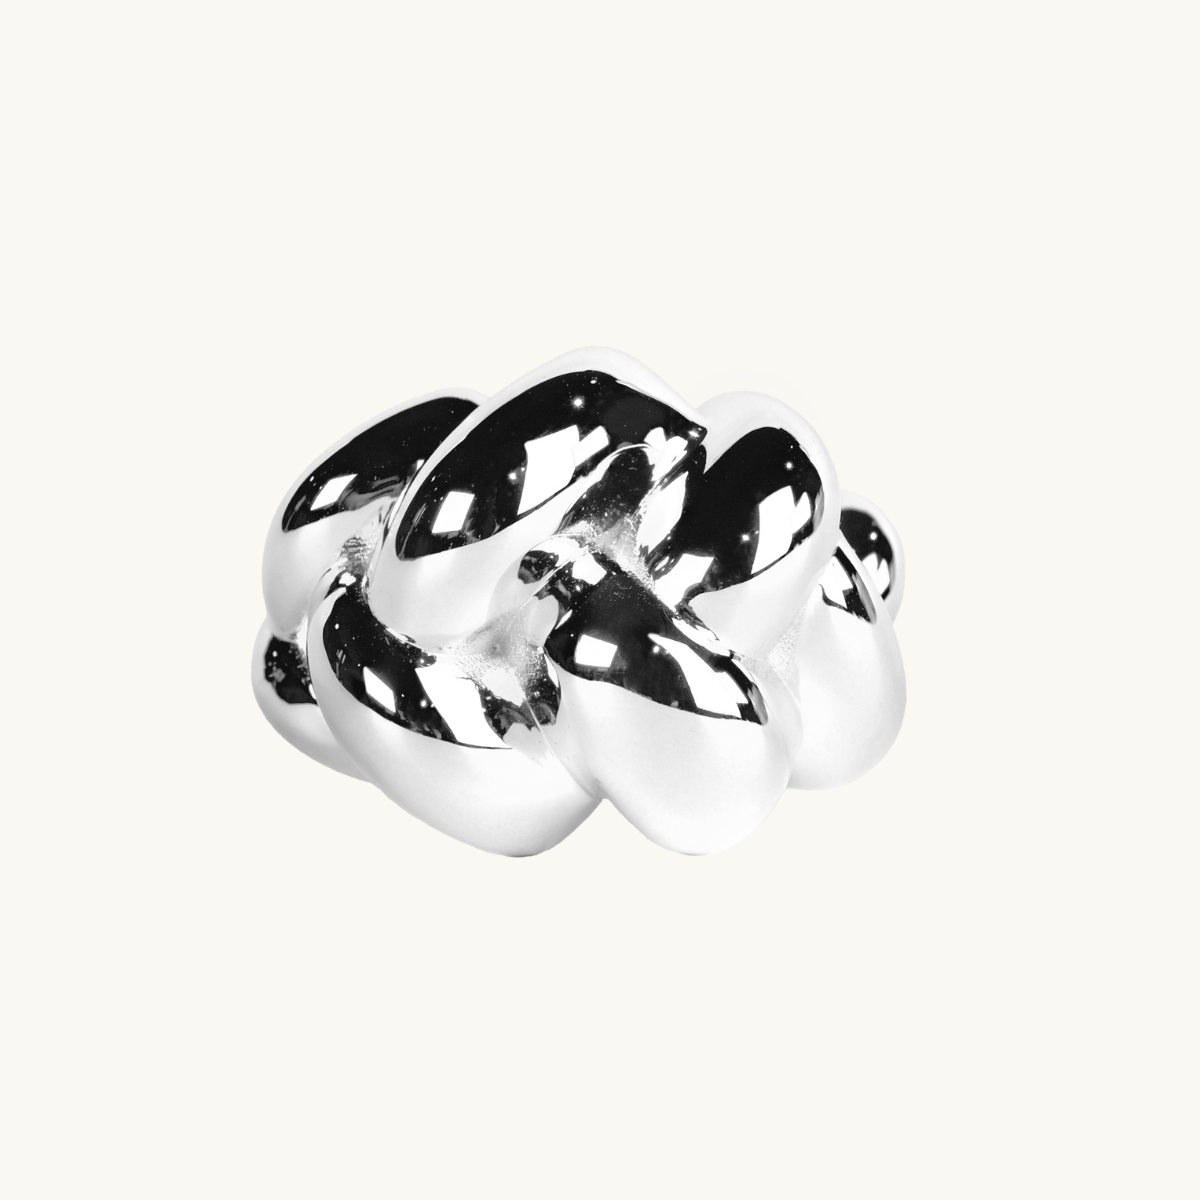 A braided ring in sterling silver.